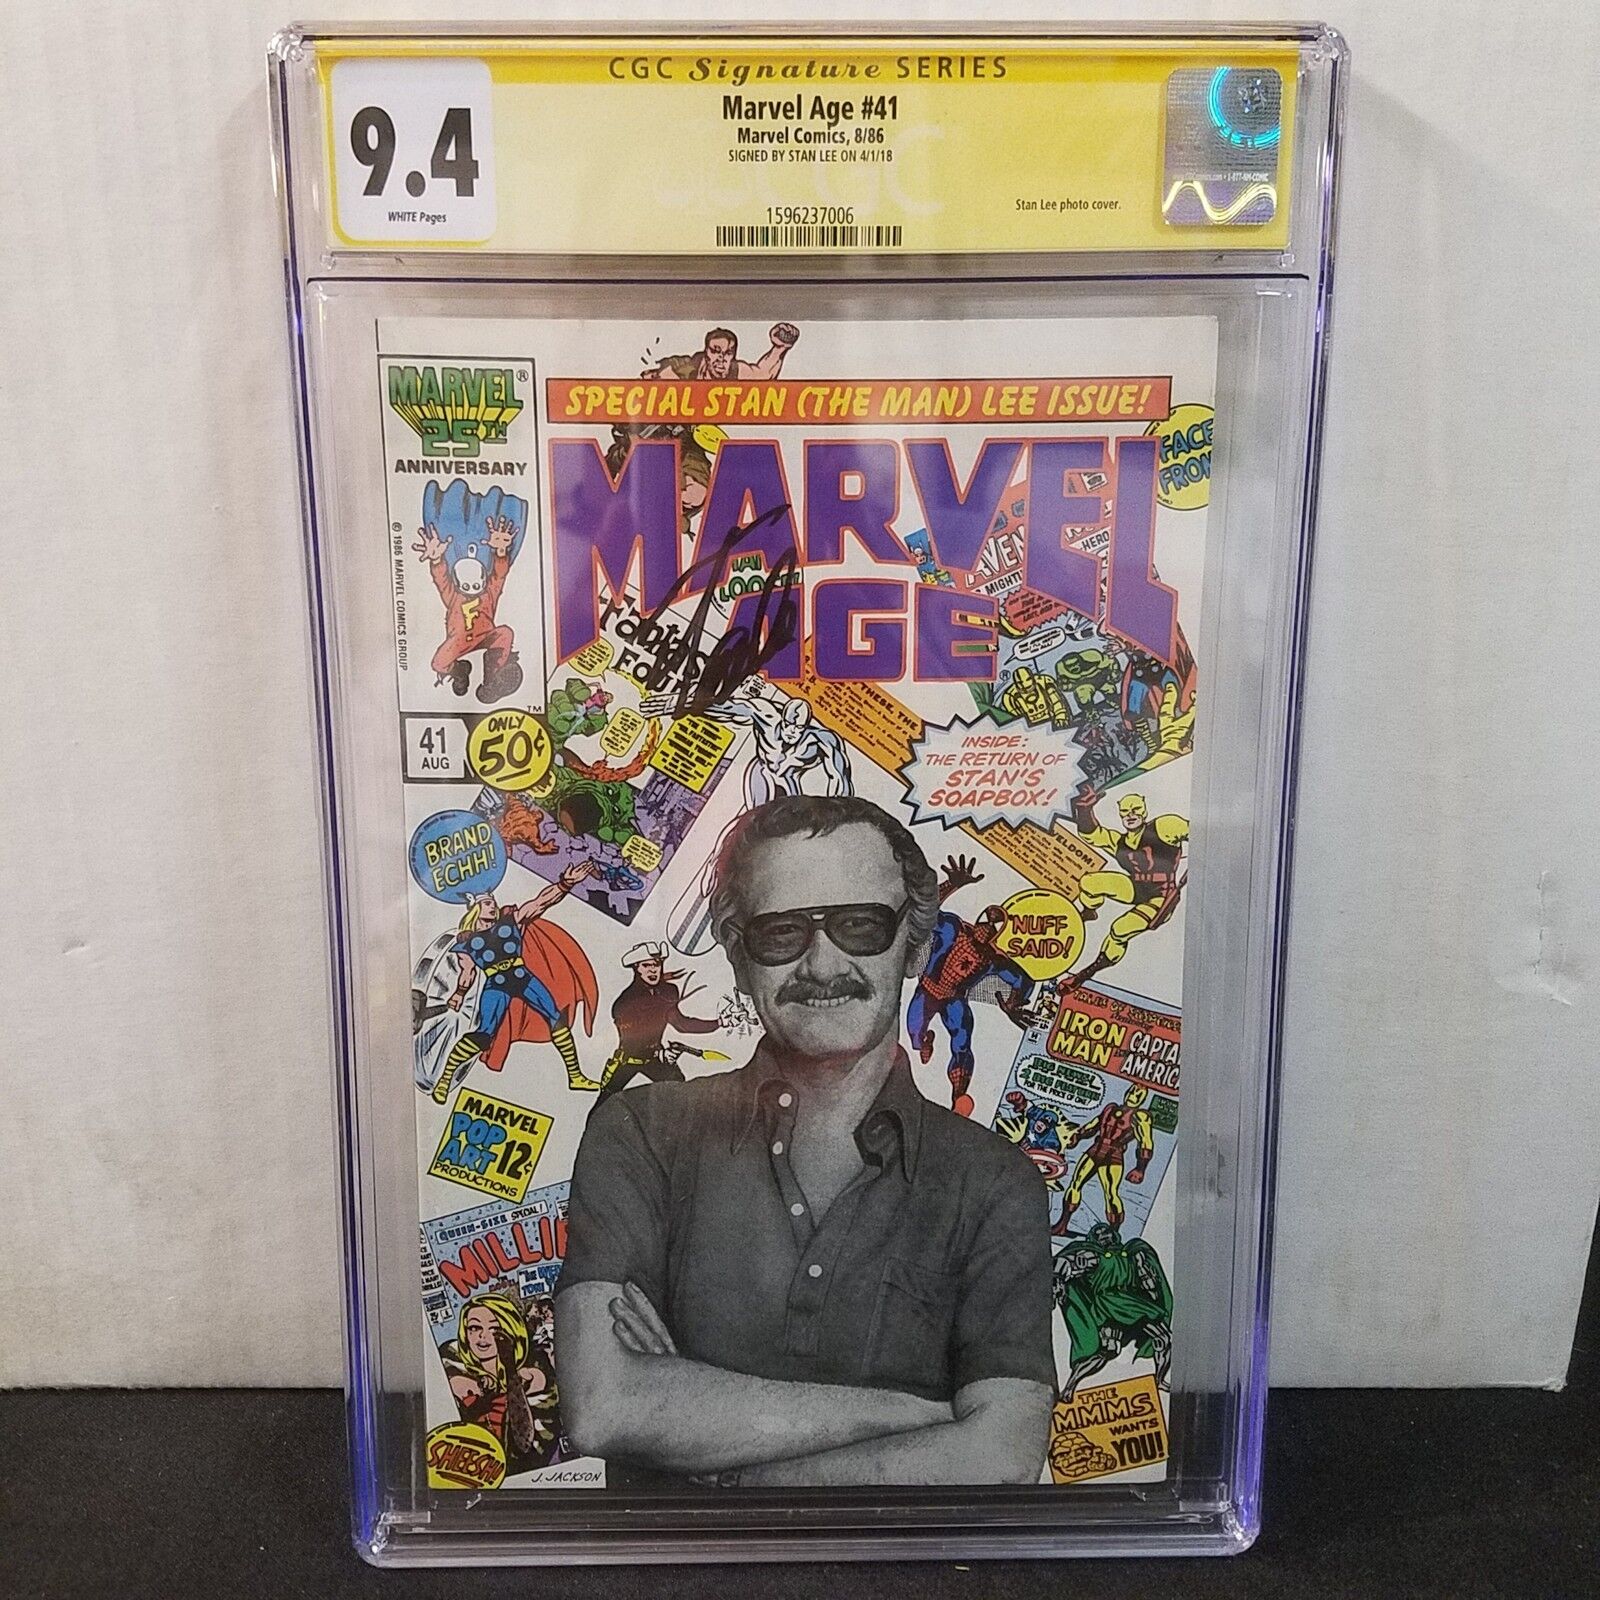 MARVEL AGE #41 CGC 9.4 SS SIGNED STAN LEE PHOTO COVER